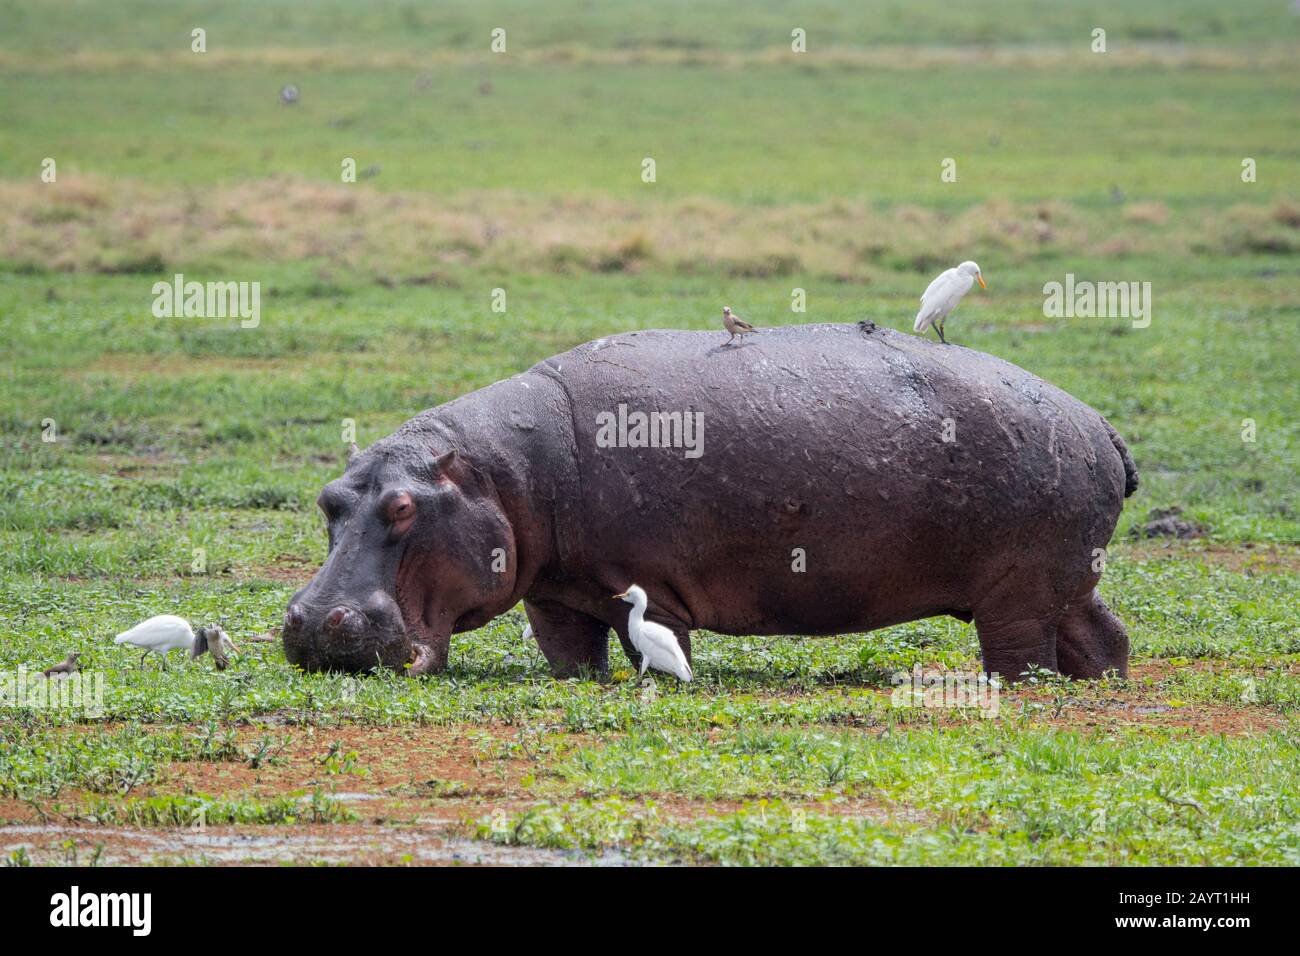 A hippo (Hippopotamus amphibious) surrounded by cattle egrets is feeding in a swamp in Amboseli National Park, Kenya. Stock Photo